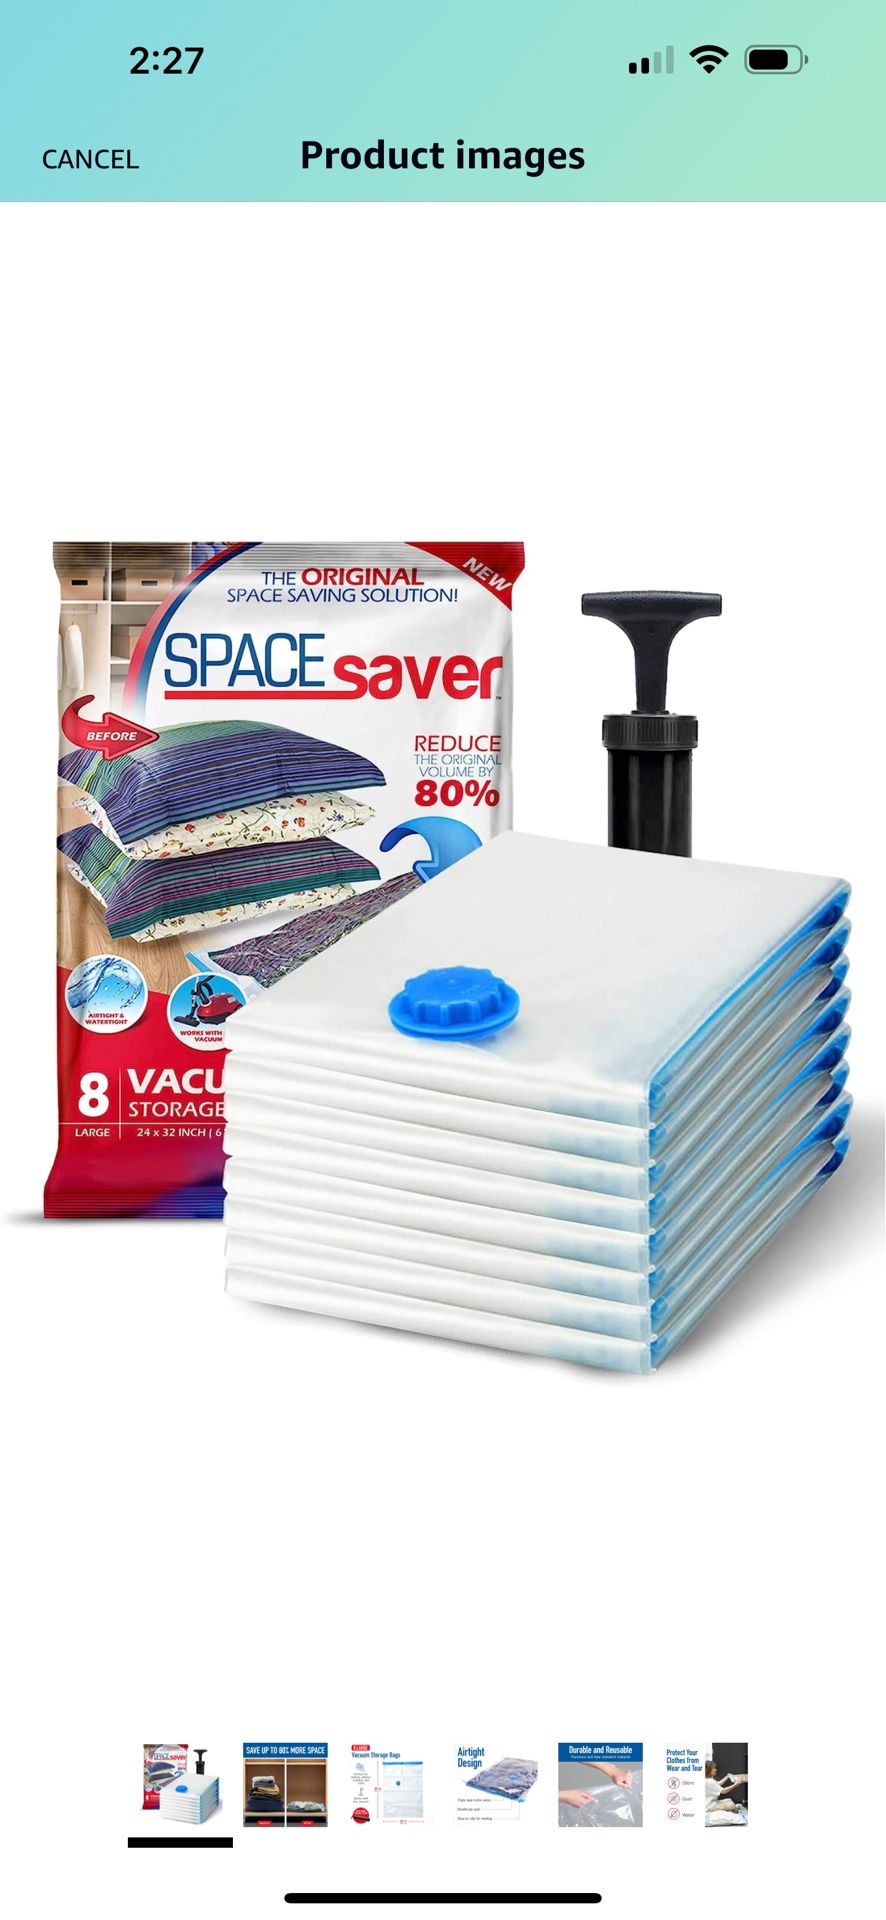 Spacesaver's Space Saver Vacuum Storage Bags (Large, 8pk) Save 80% Storage Space - Vacuum Sealer Bags for Comforters, Blankets, Bedding, Clothing - Co